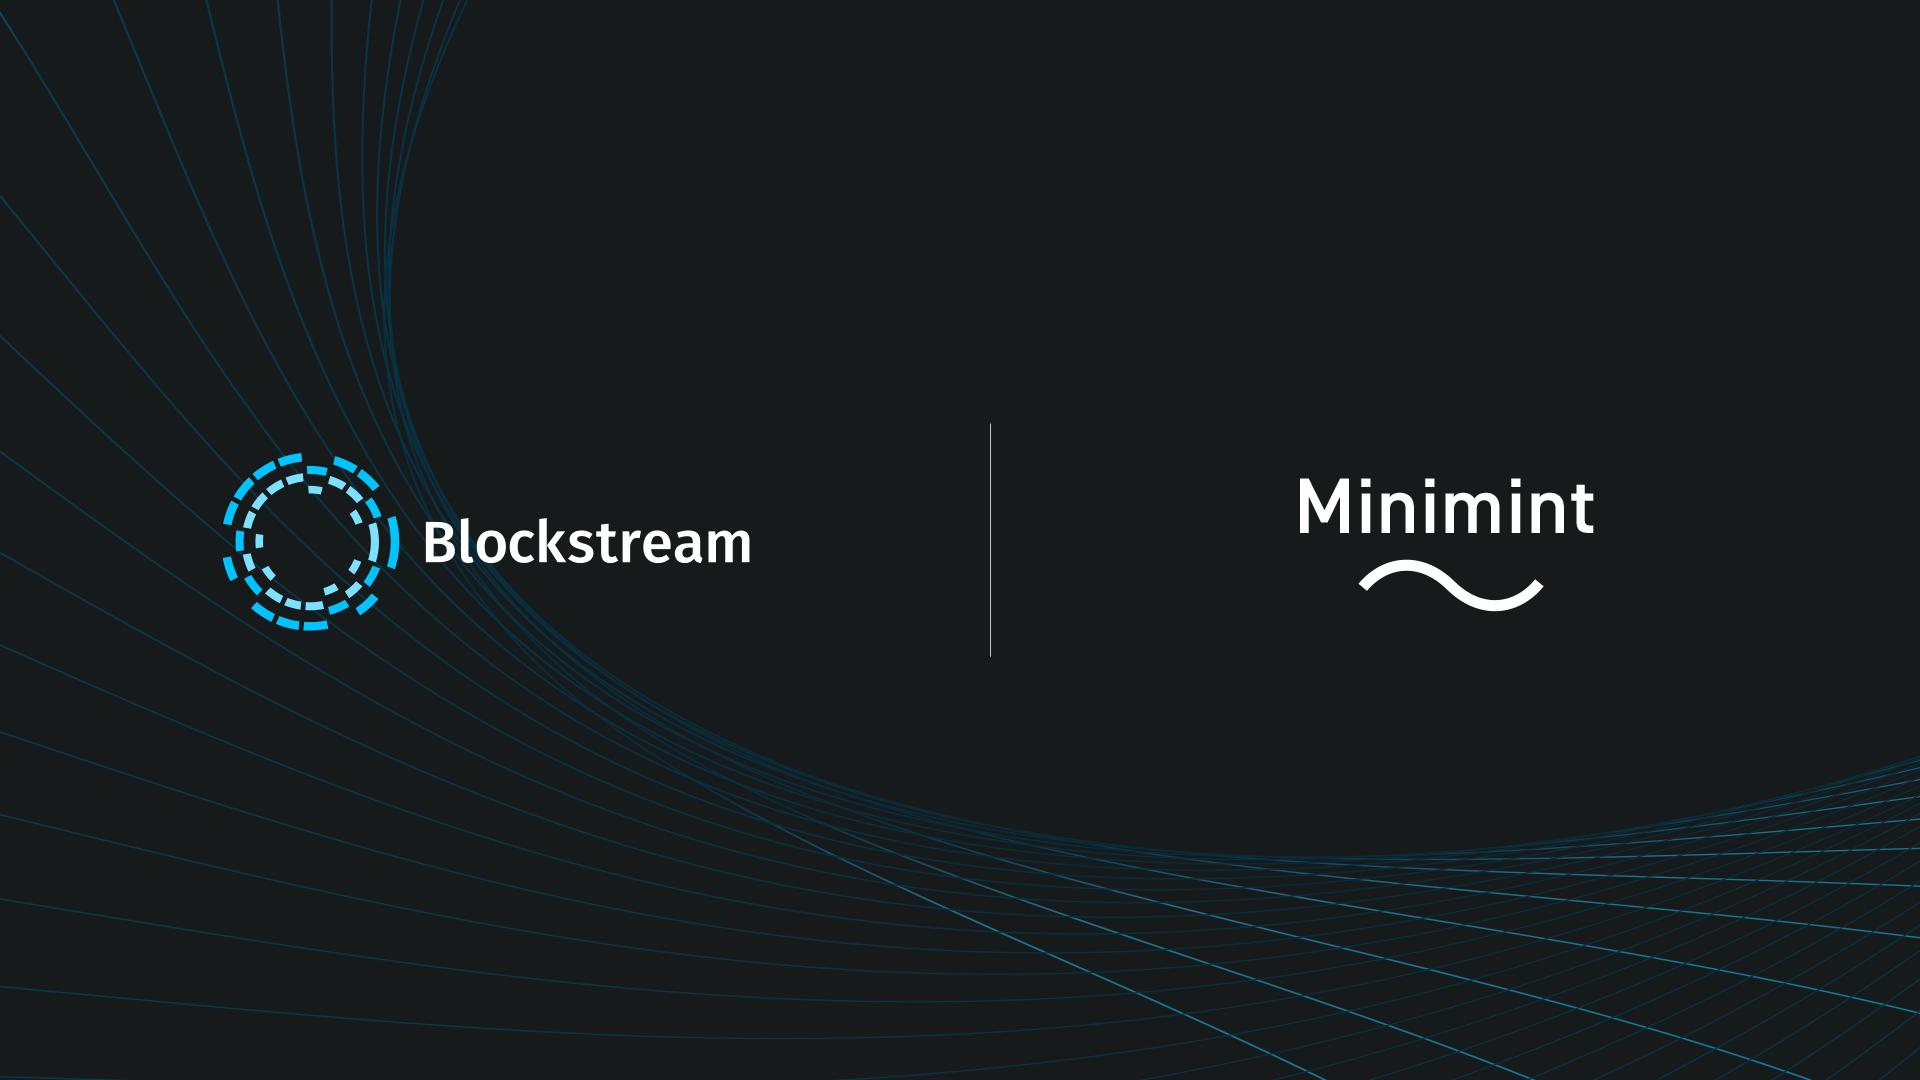 Blockstream Sponsors Minimint, a Privacy-Focused, Community-Led Scaling Solution for Bitcoin